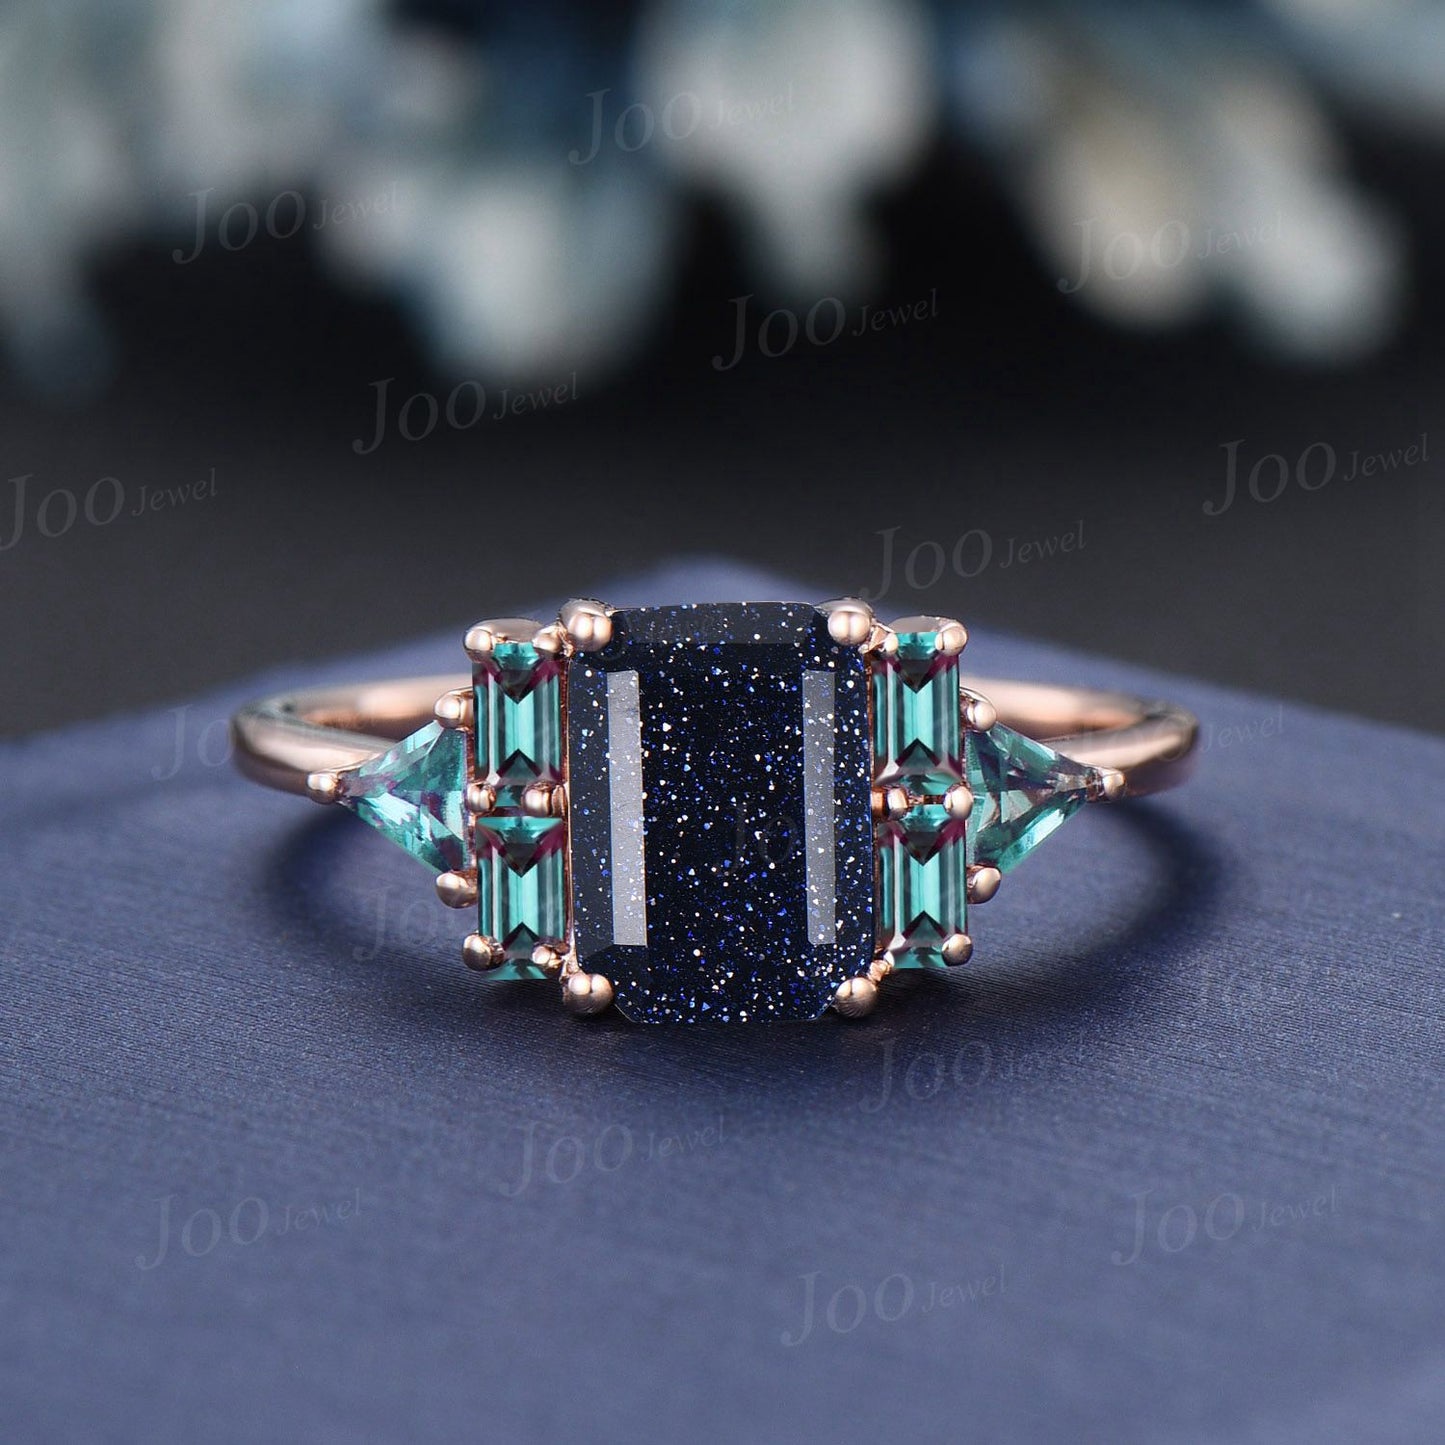 Czech diamond-cut window beads with silver edges in alexandrite blue –  Earthly Adornments